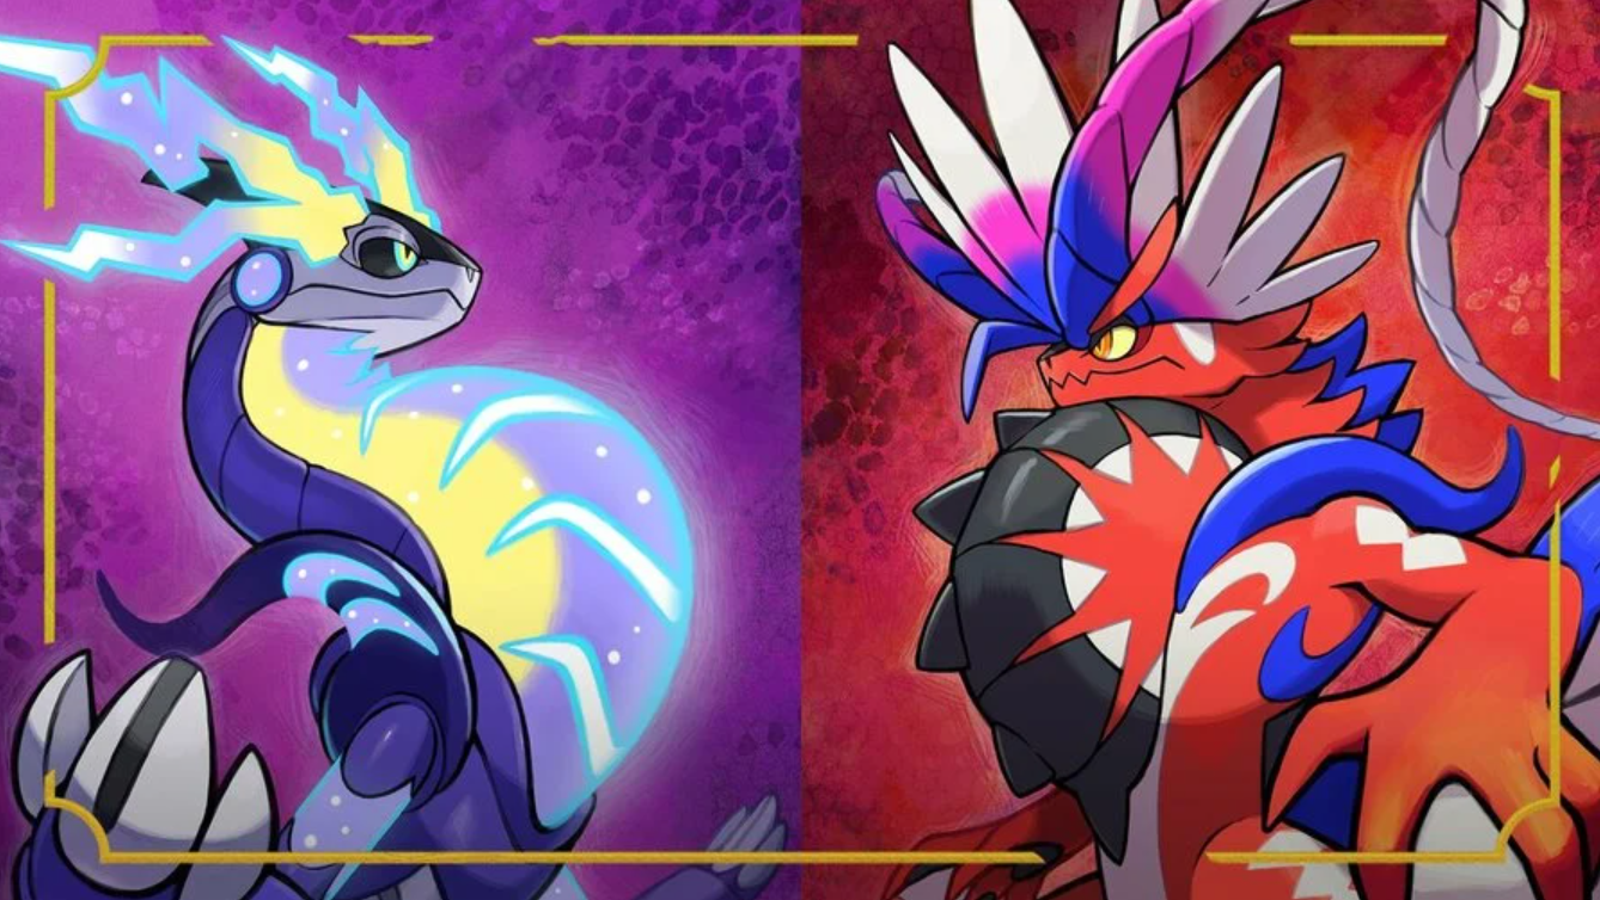 There are some epic pre-orders coming from Pokemon so make sure to